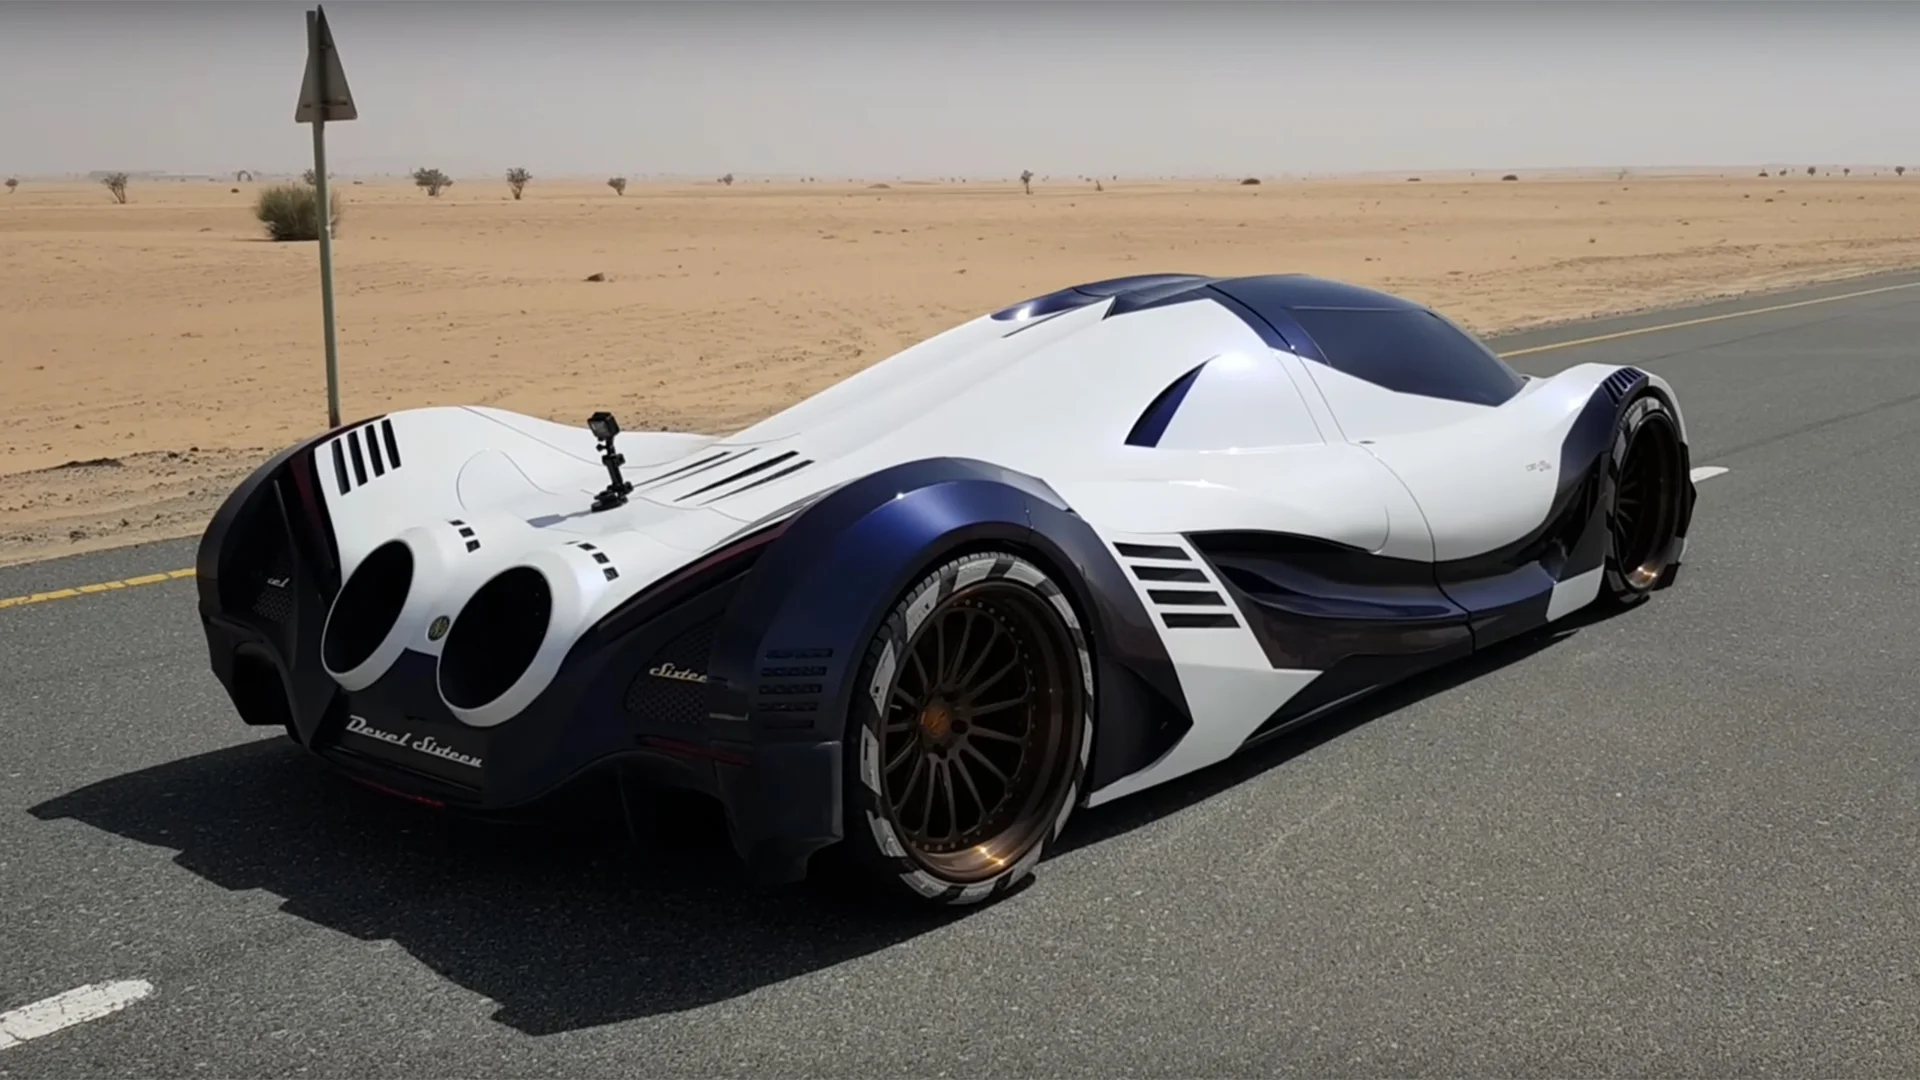 Devel Sixteen out testing in the desert